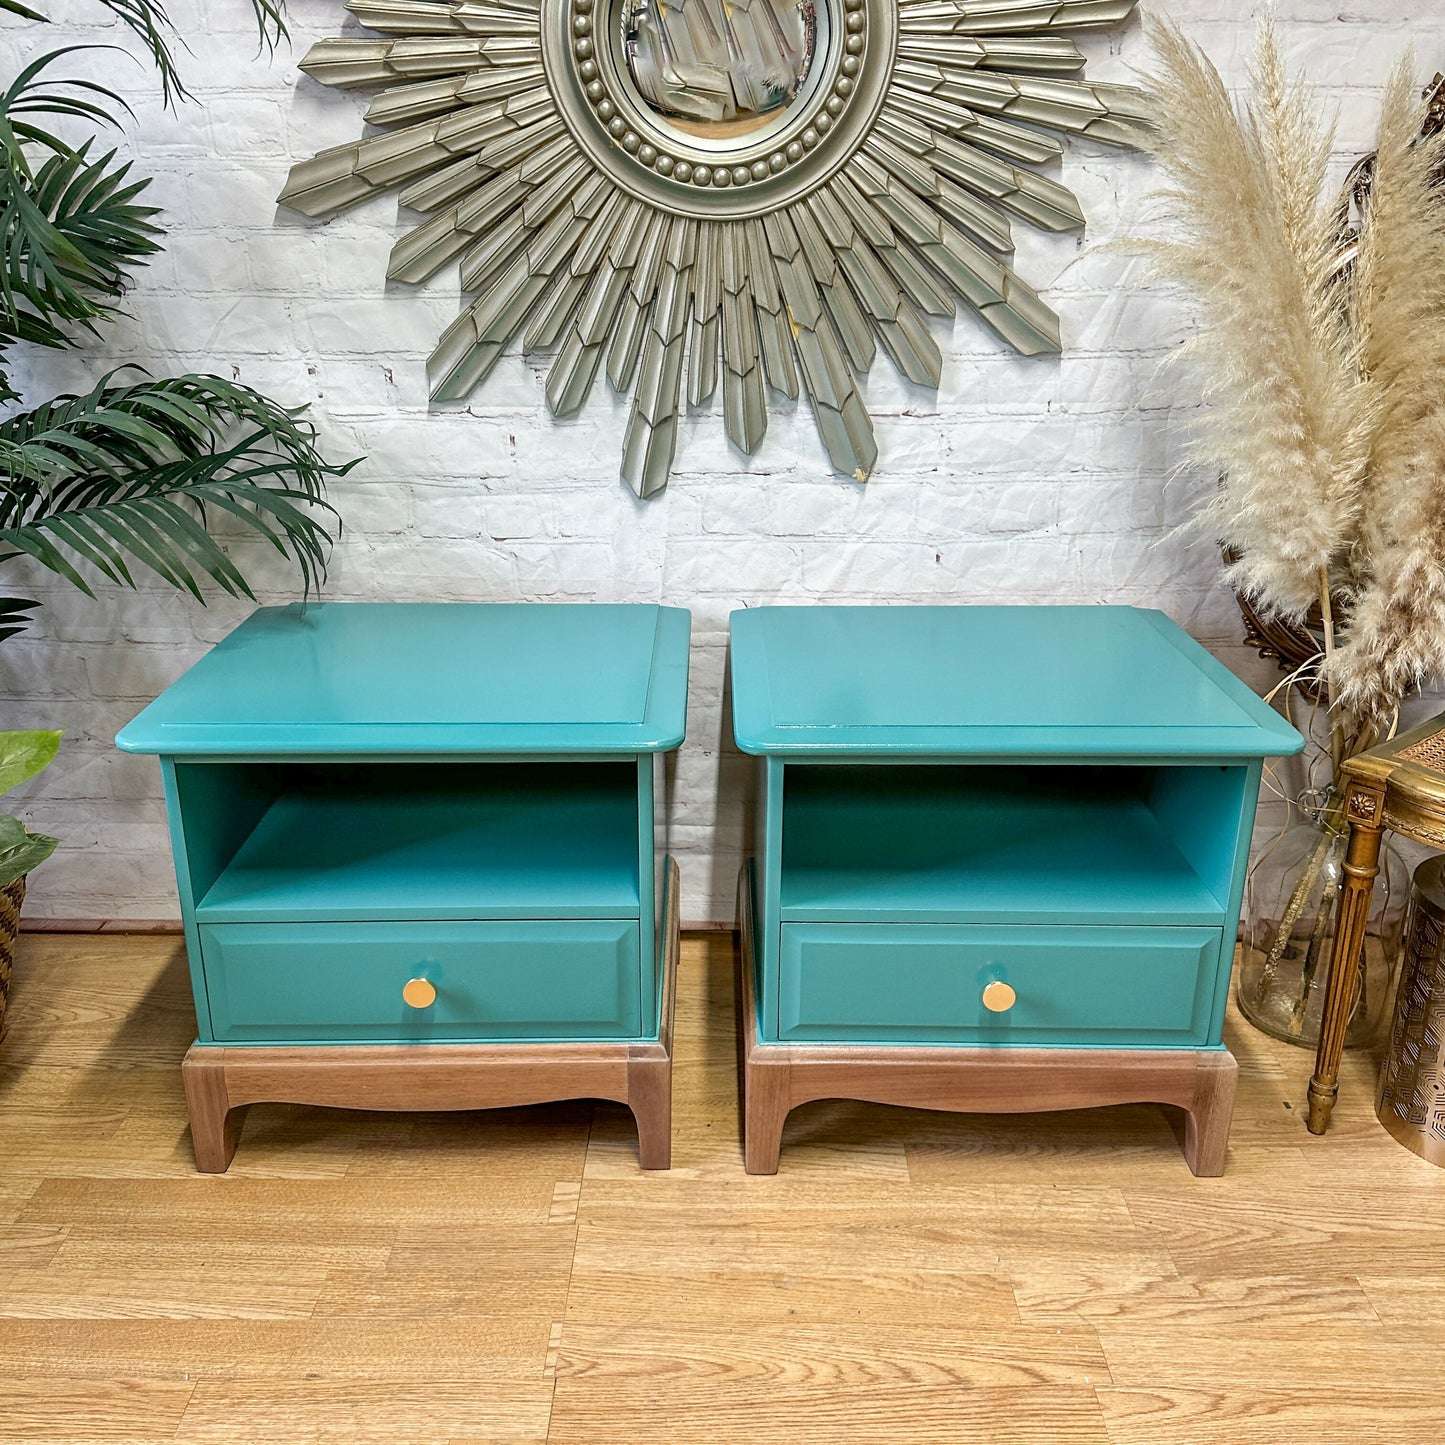 Pair of Stag Minstrel Bedside Tables, Bedside Drawers, Cabinets, Nightstands - MADE TO ORDER